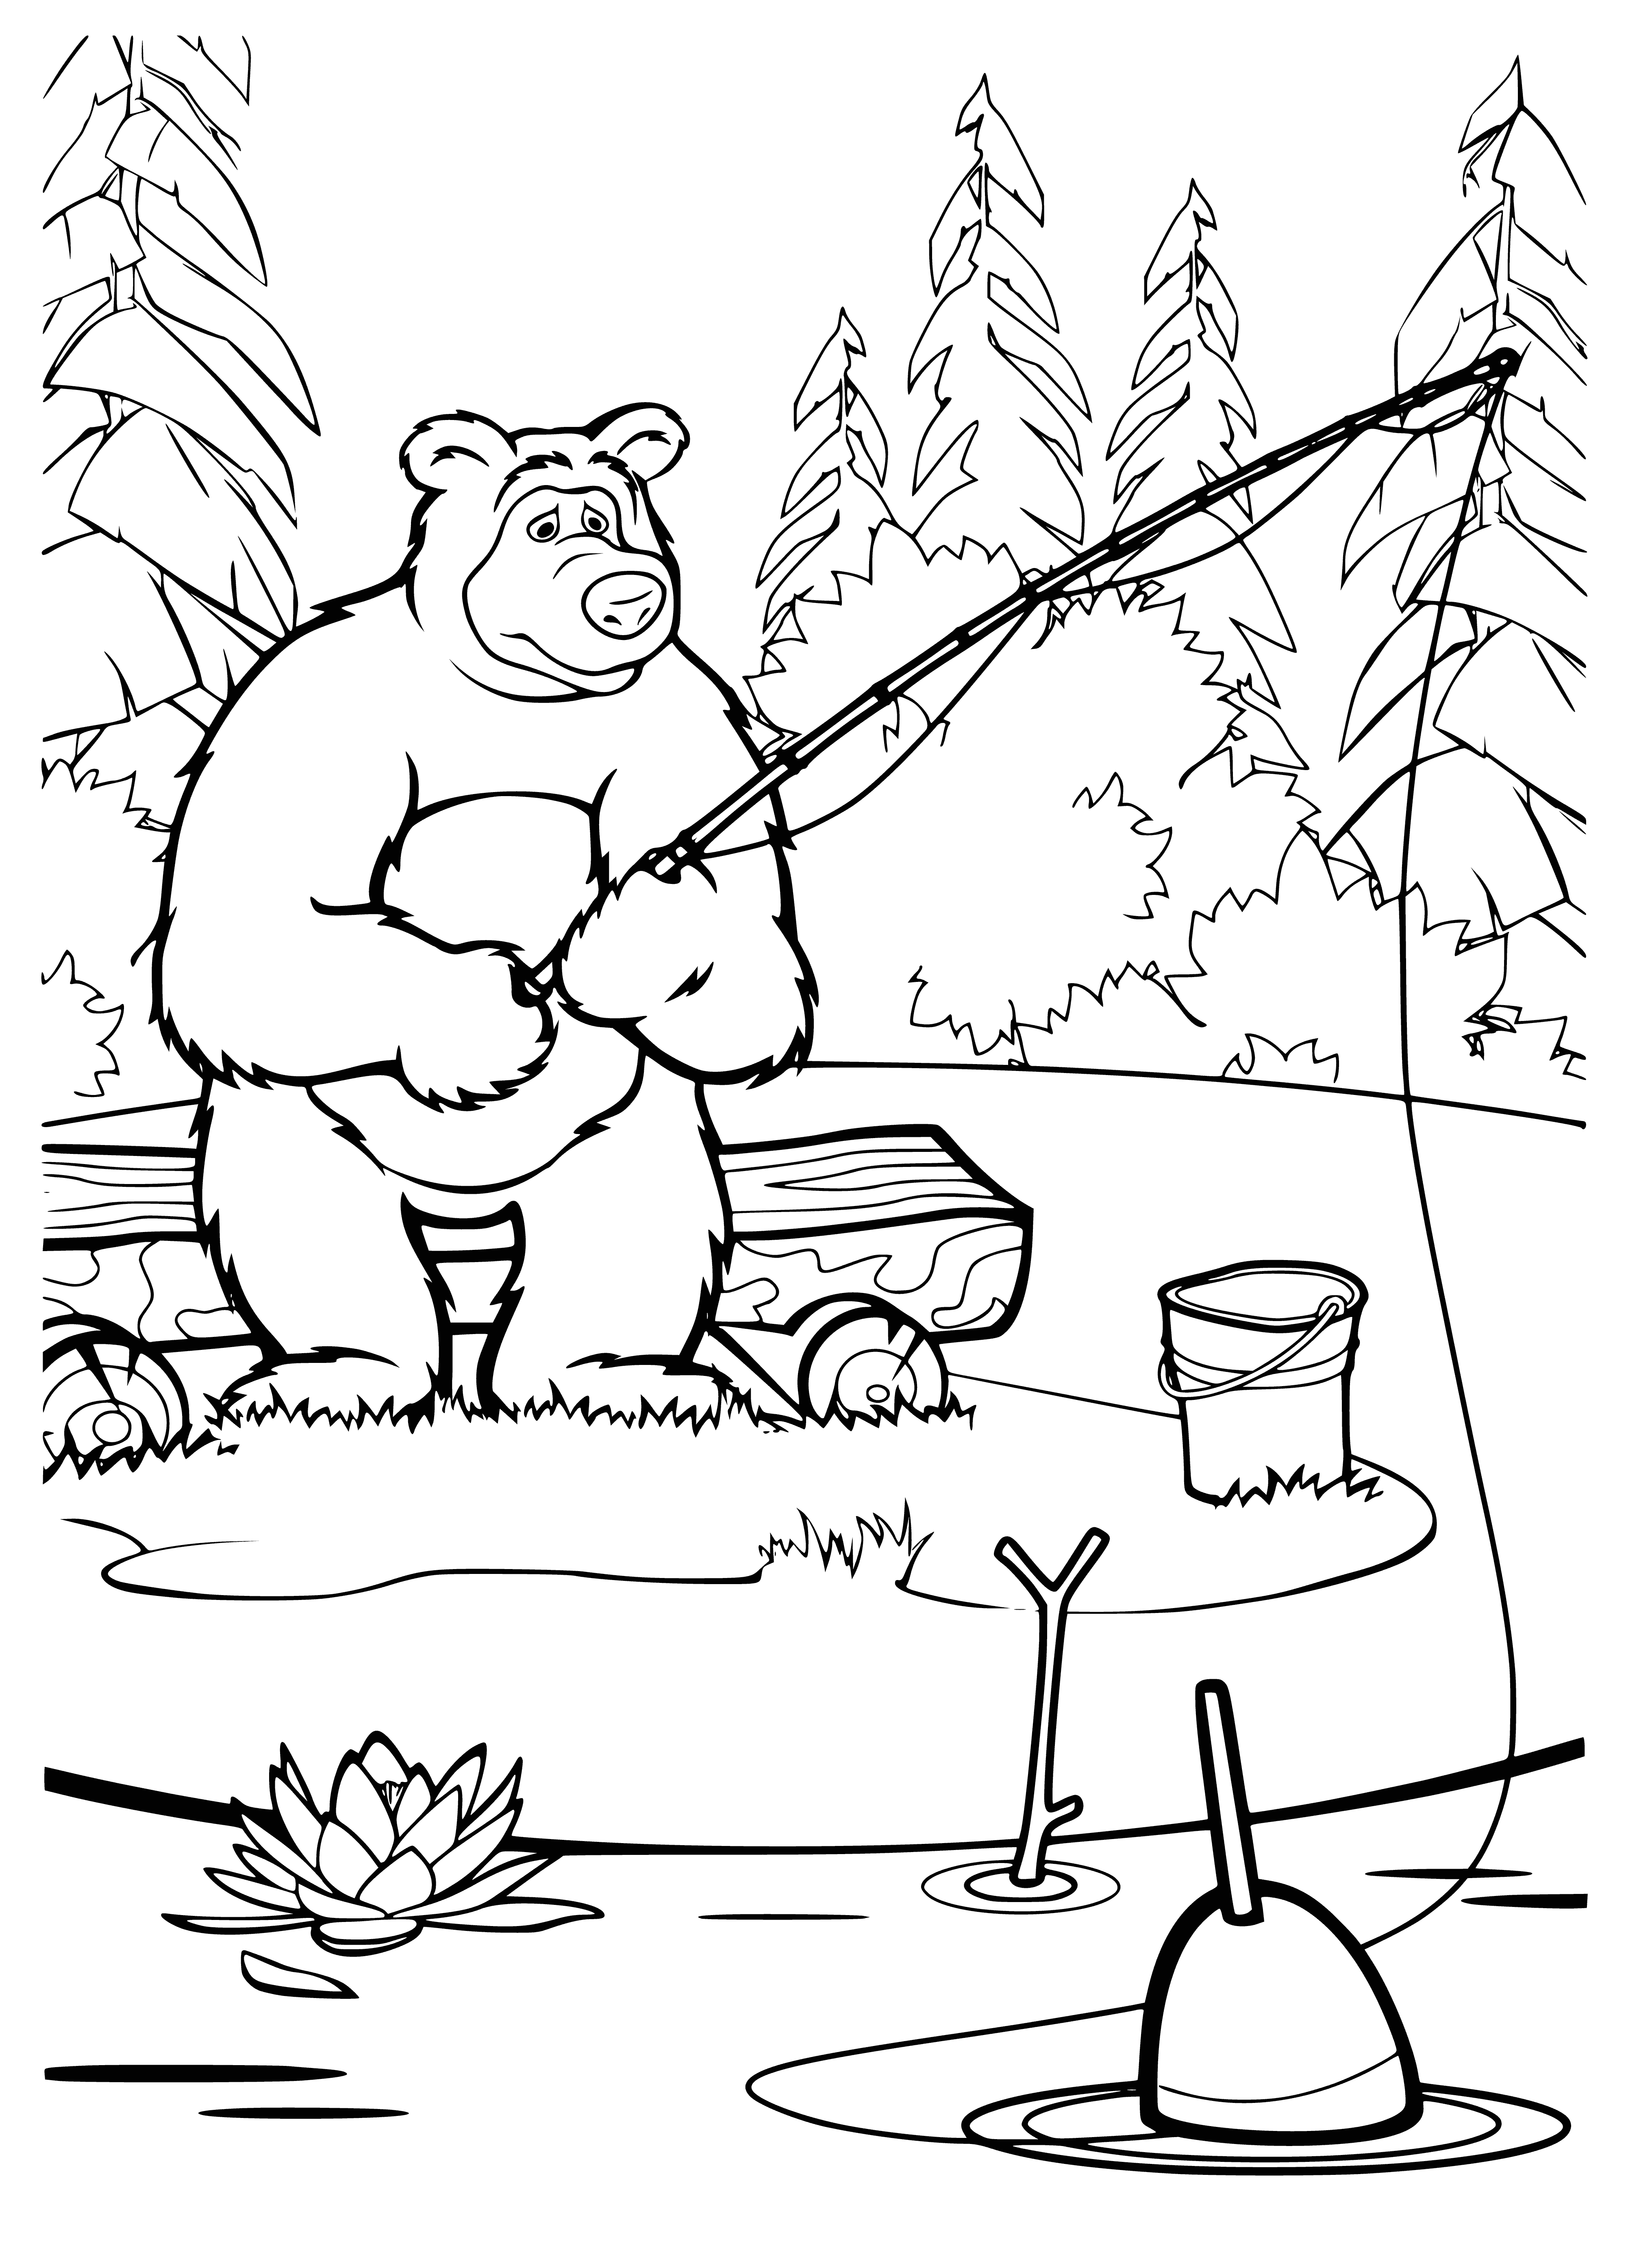 coloring page: Masha & Bear fishing near a river: Bear with rod & Masha with teddy-bear-net catching fish.